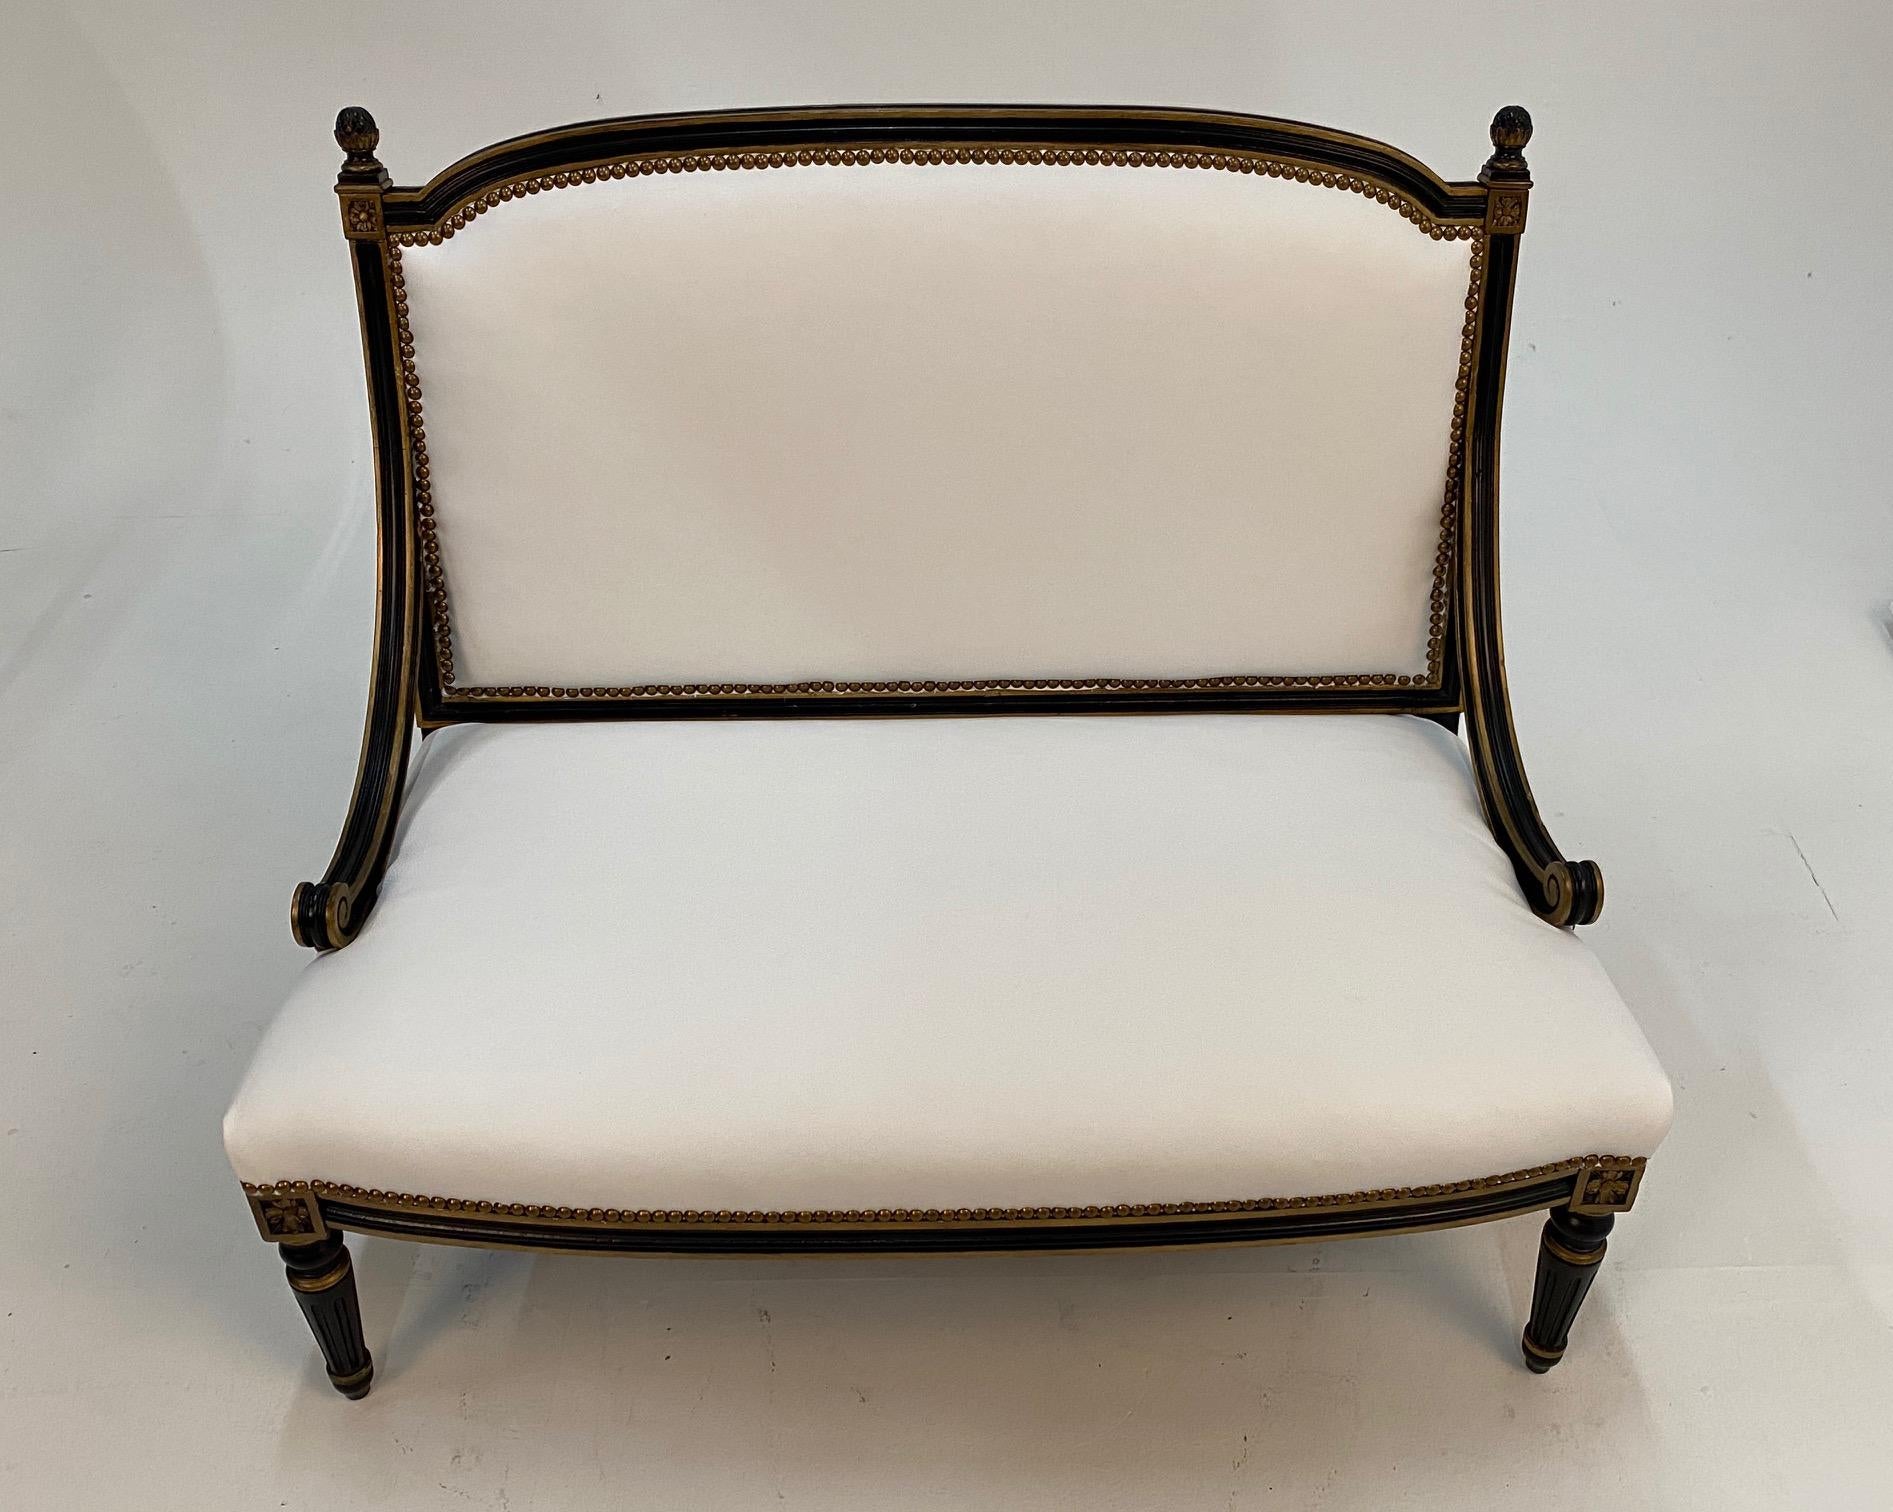 Elegant Hollywood Regency loveseat having ebonized and gilded frame with turned legs, windowpane back, low slung curved arms and brand new white leather upholstery.